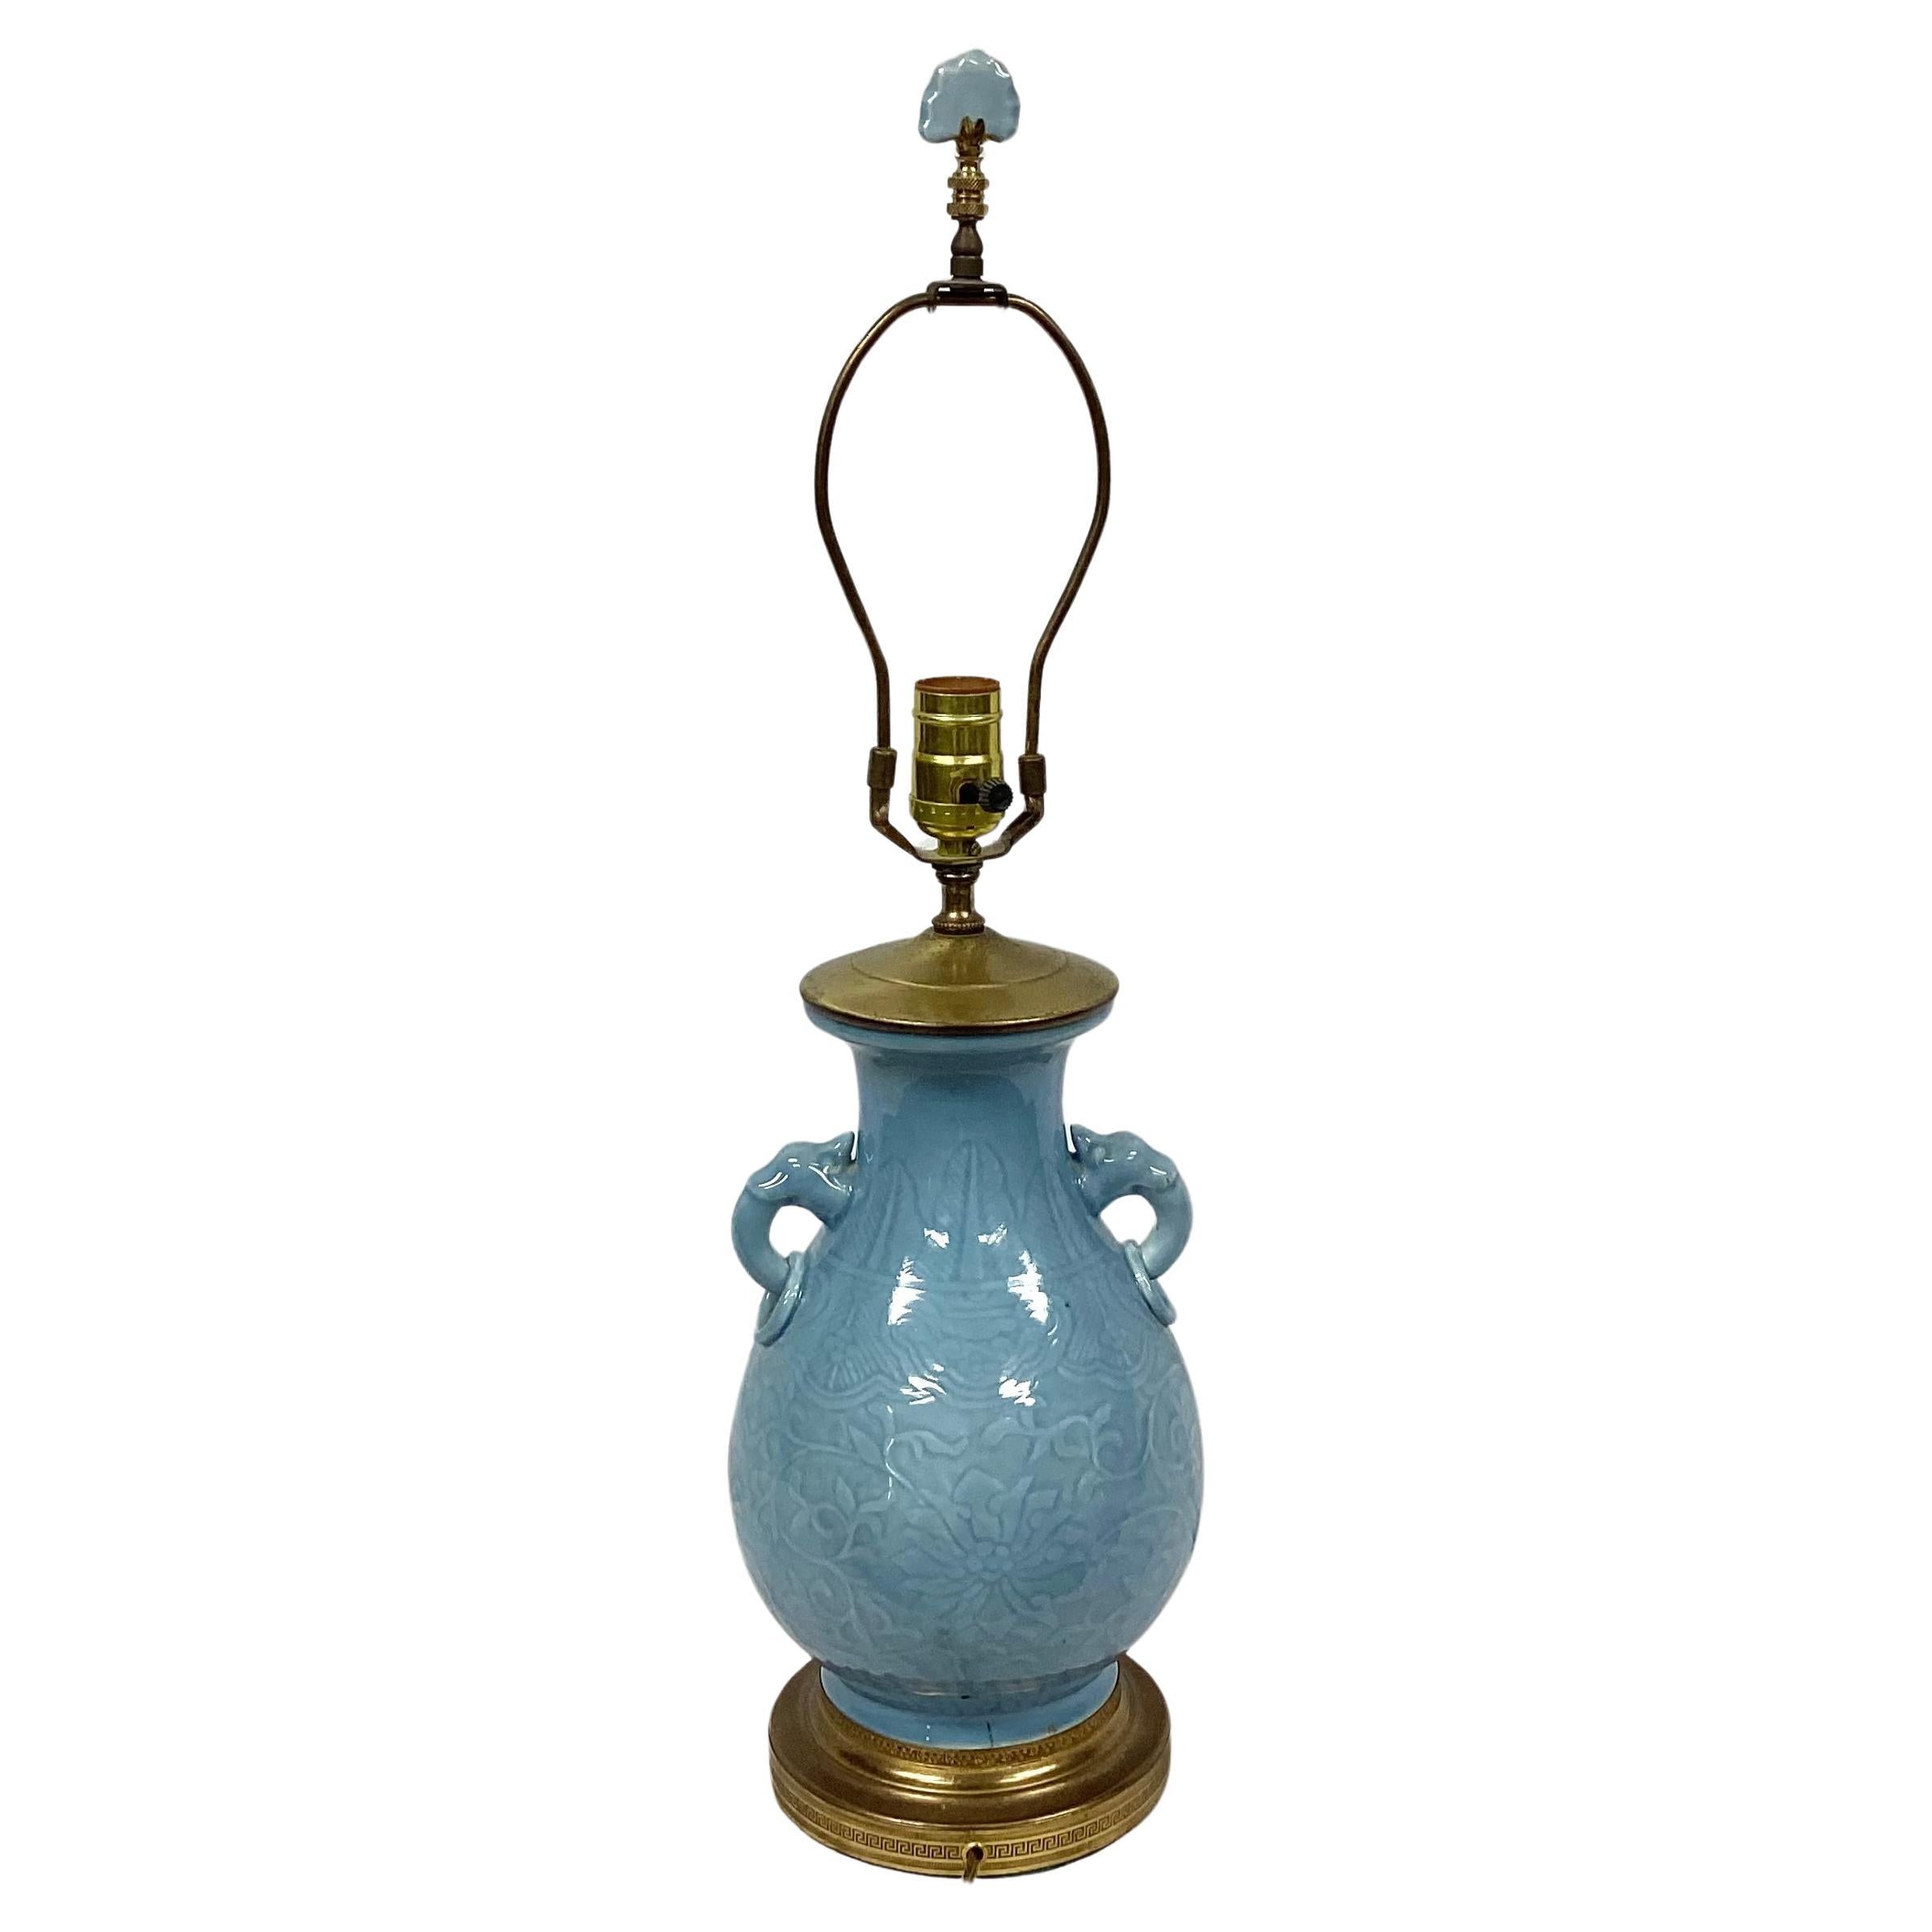 Mid 20th Century Chinese Gilt Brass Mounted Celadon porcelain lamp with molded elephant ring handles and matching finial. Harp and finial included. Molded blue floral motif throughout lamp. Mounted on gilt brass base. Measures 25.5 inches from base